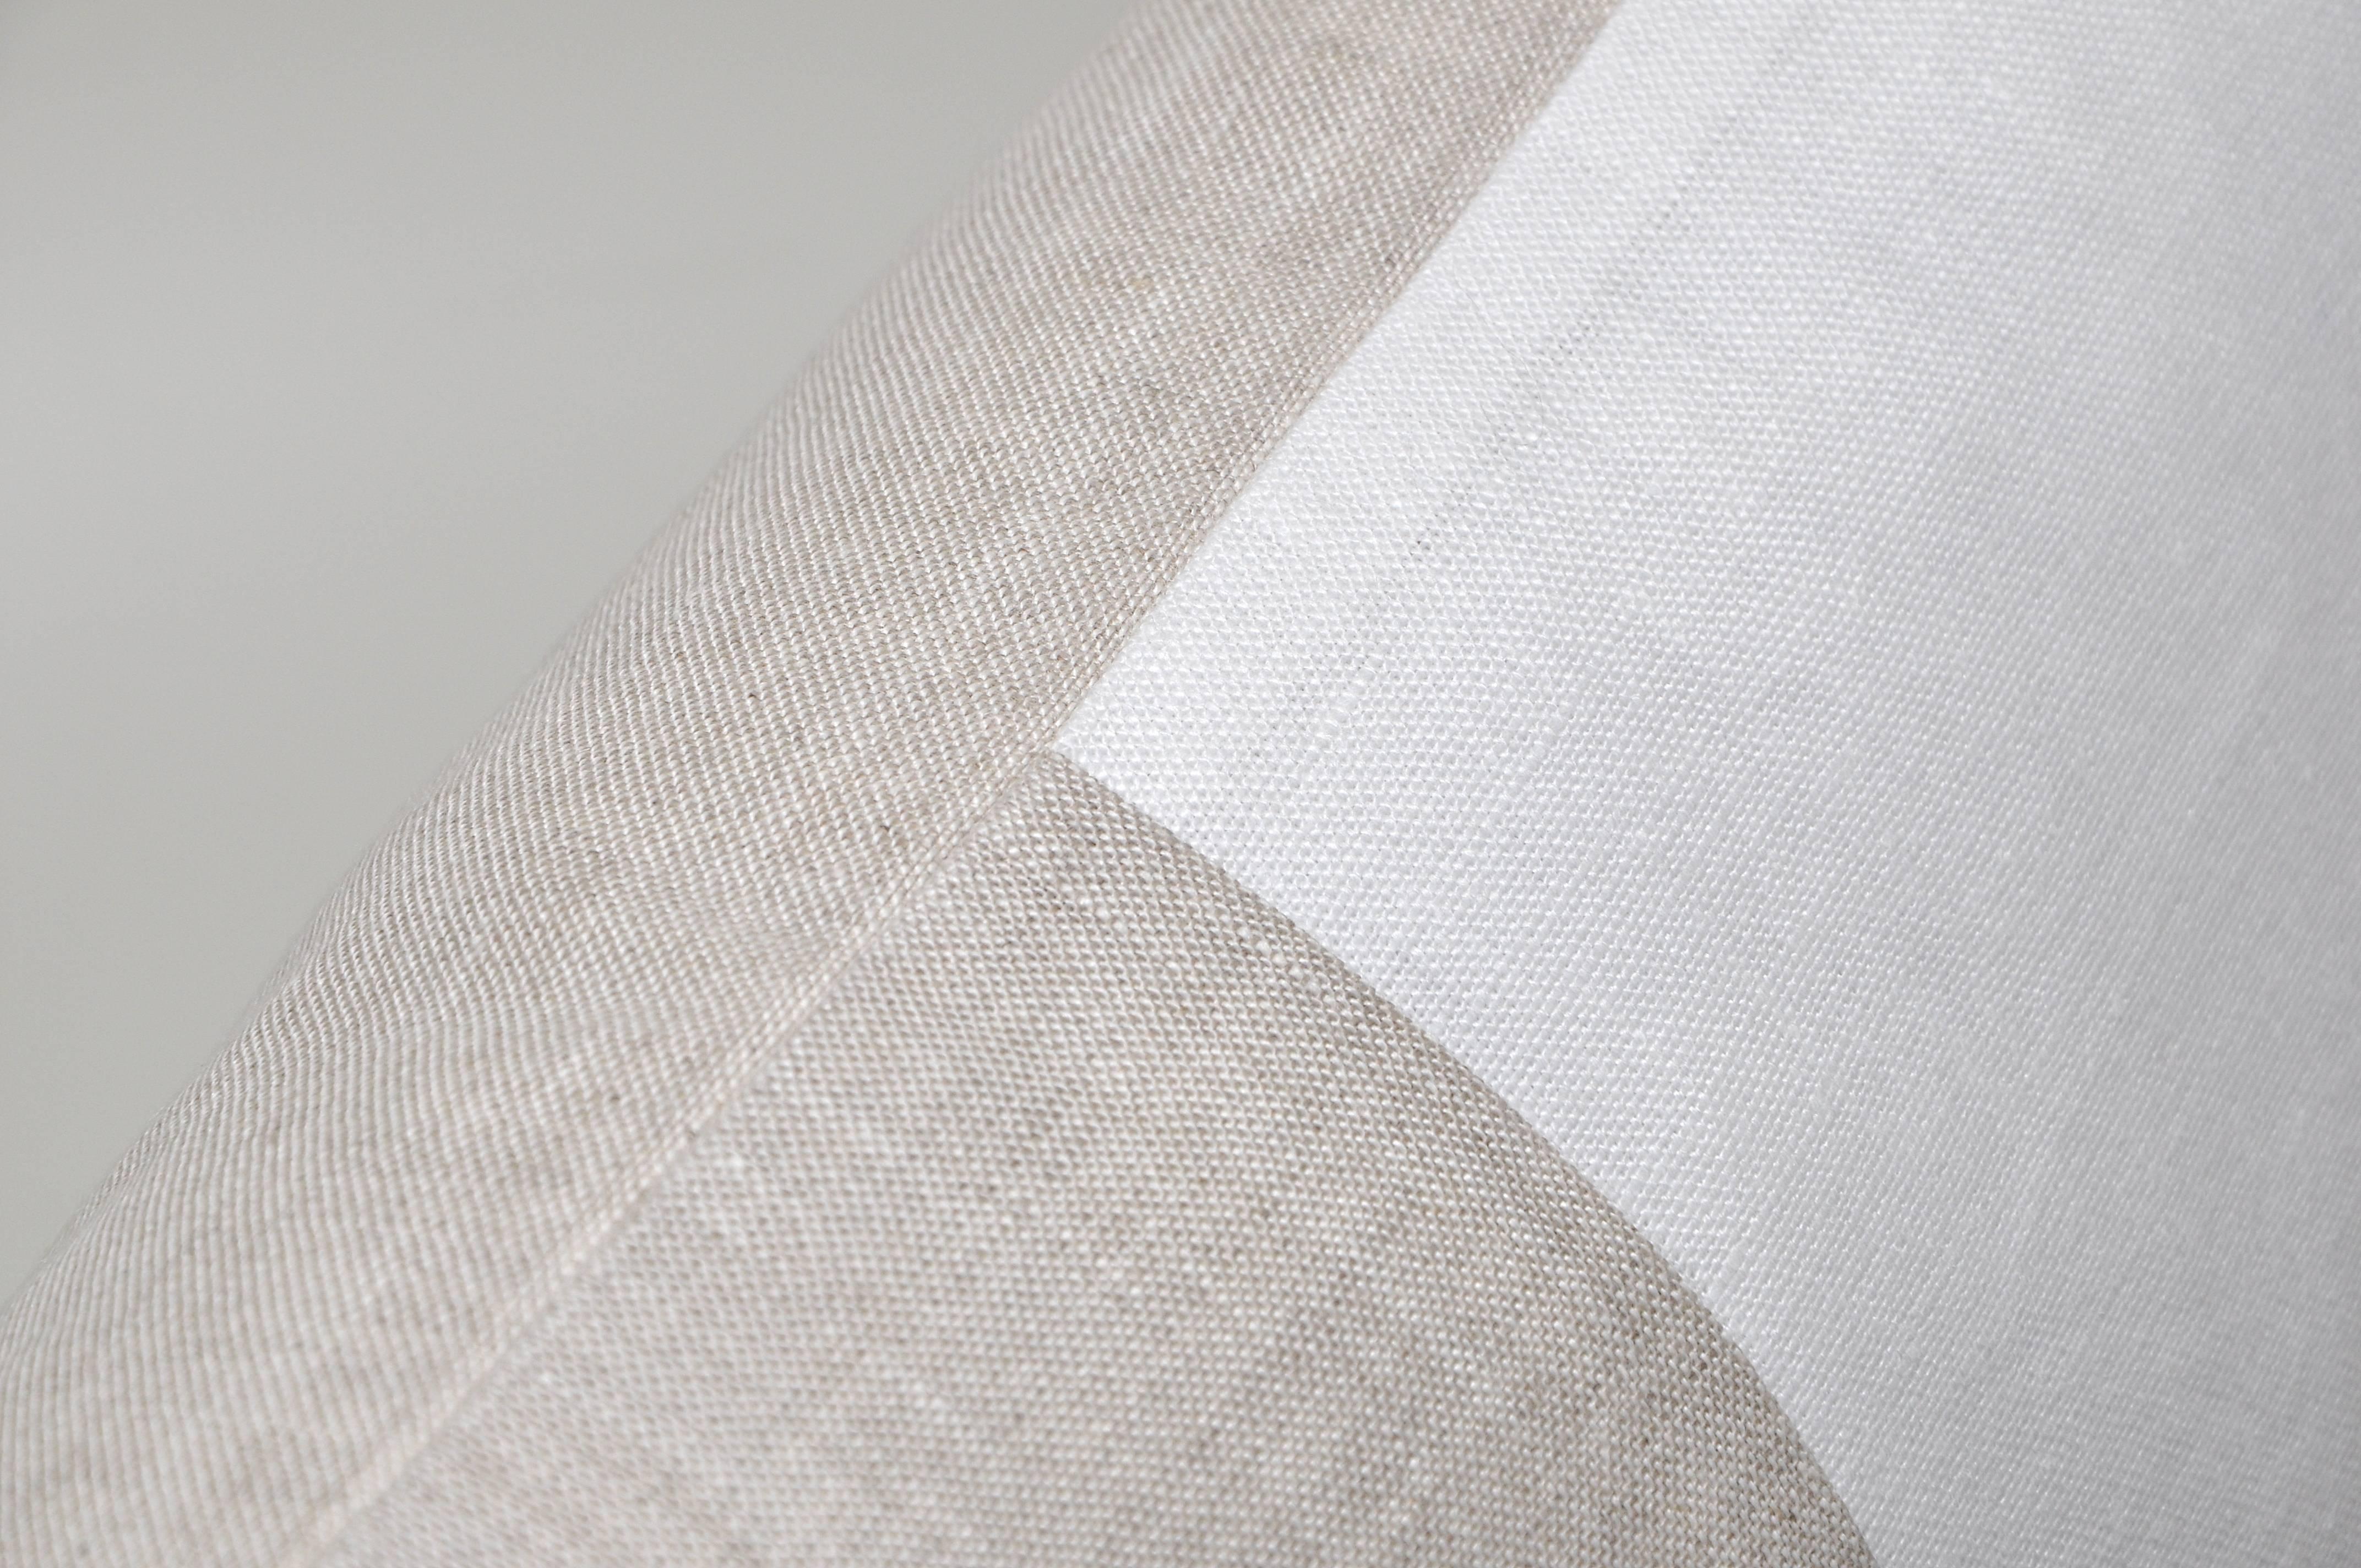 A pair of matching custom-made luxury contemporary pillows (cushions) of 100 % pure Irish linen. A signature combination of classic pristine white matched with traditional oatmeal. The oatmeal is a beautiful mottled color which is the mixture of a